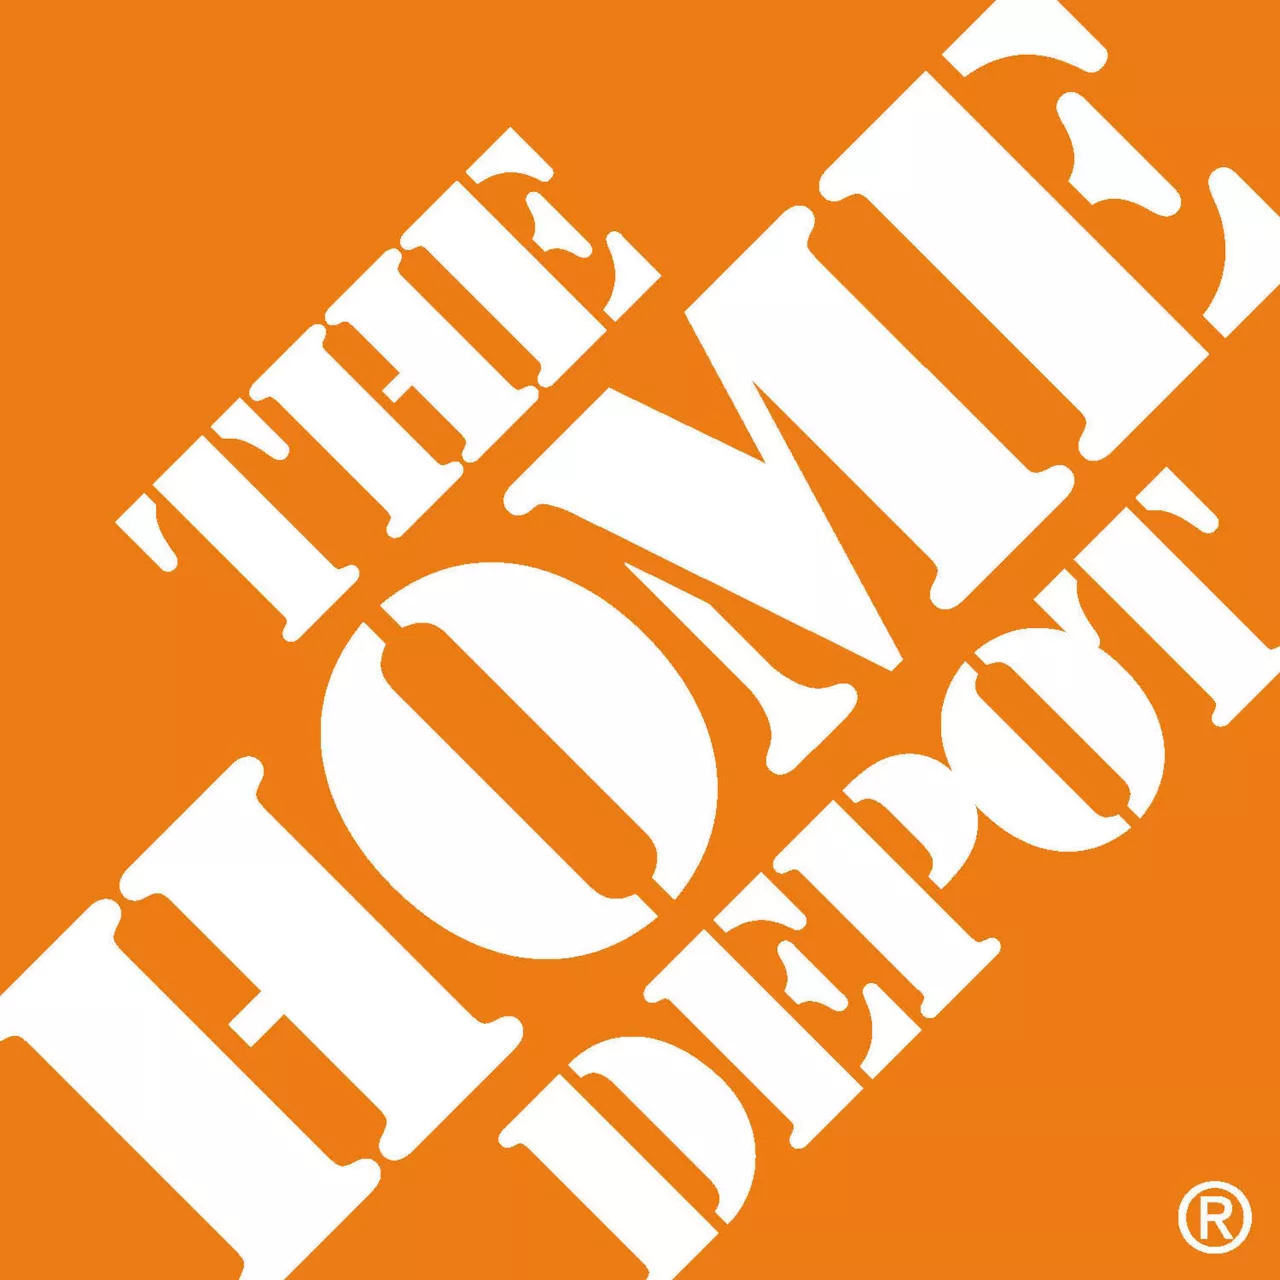 The Home Depot logo img#1